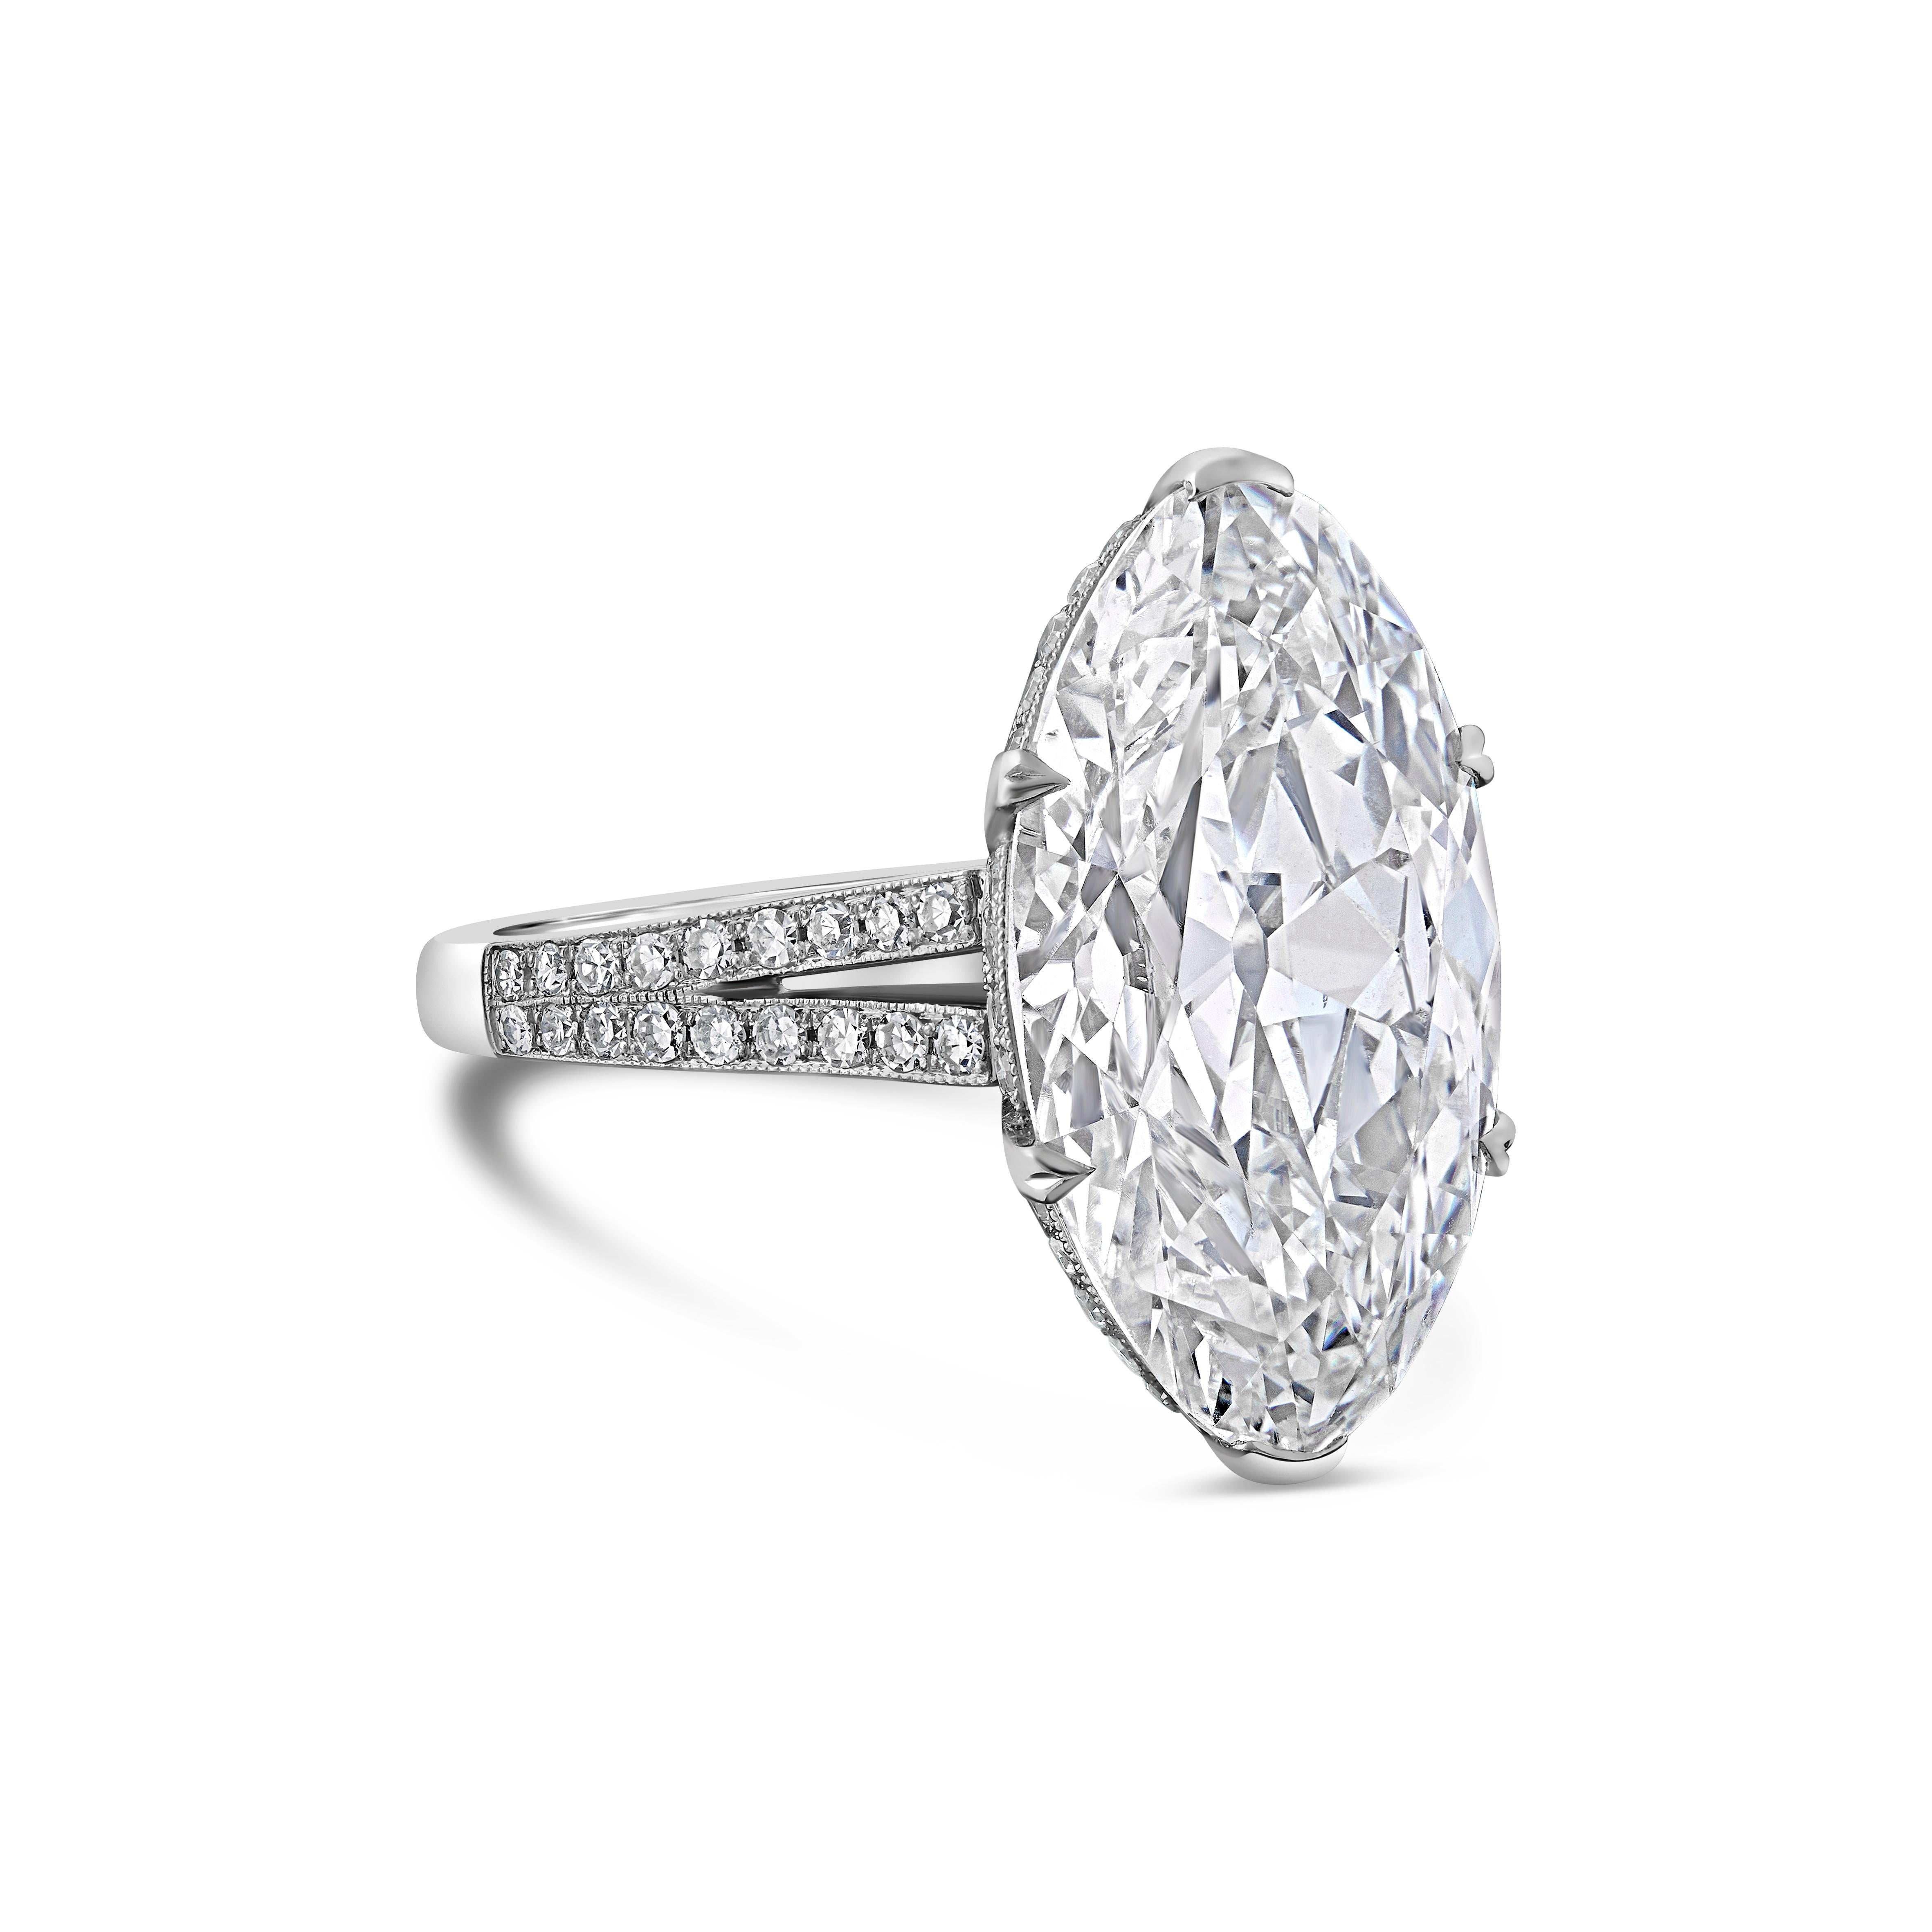 A sensational diamond ring by Hancocks set with a beautiful antique moval shaped brilliant cut diamond weighing 8.31cts and of H colour and SI1 clarity claw set to an open gallery embellished with single cut diamonds between split shoulders with